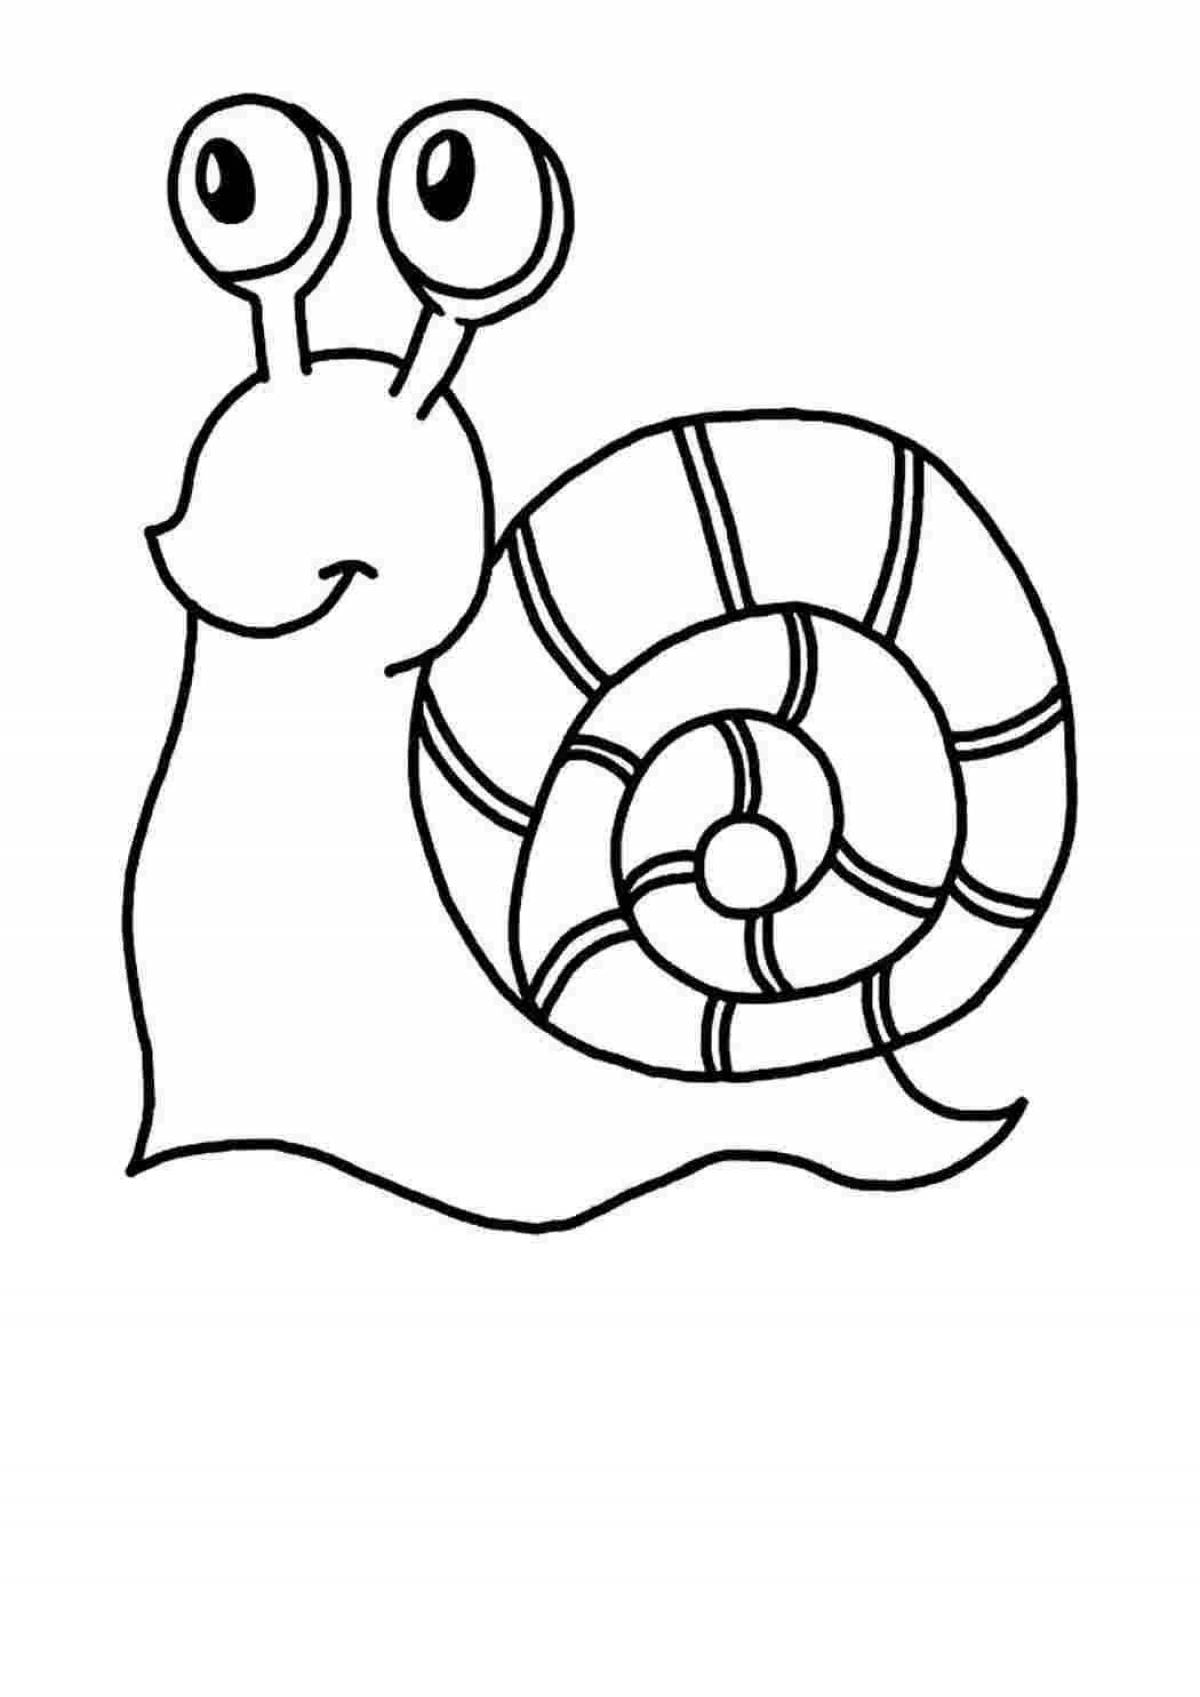 Fun drawing of a snail for children